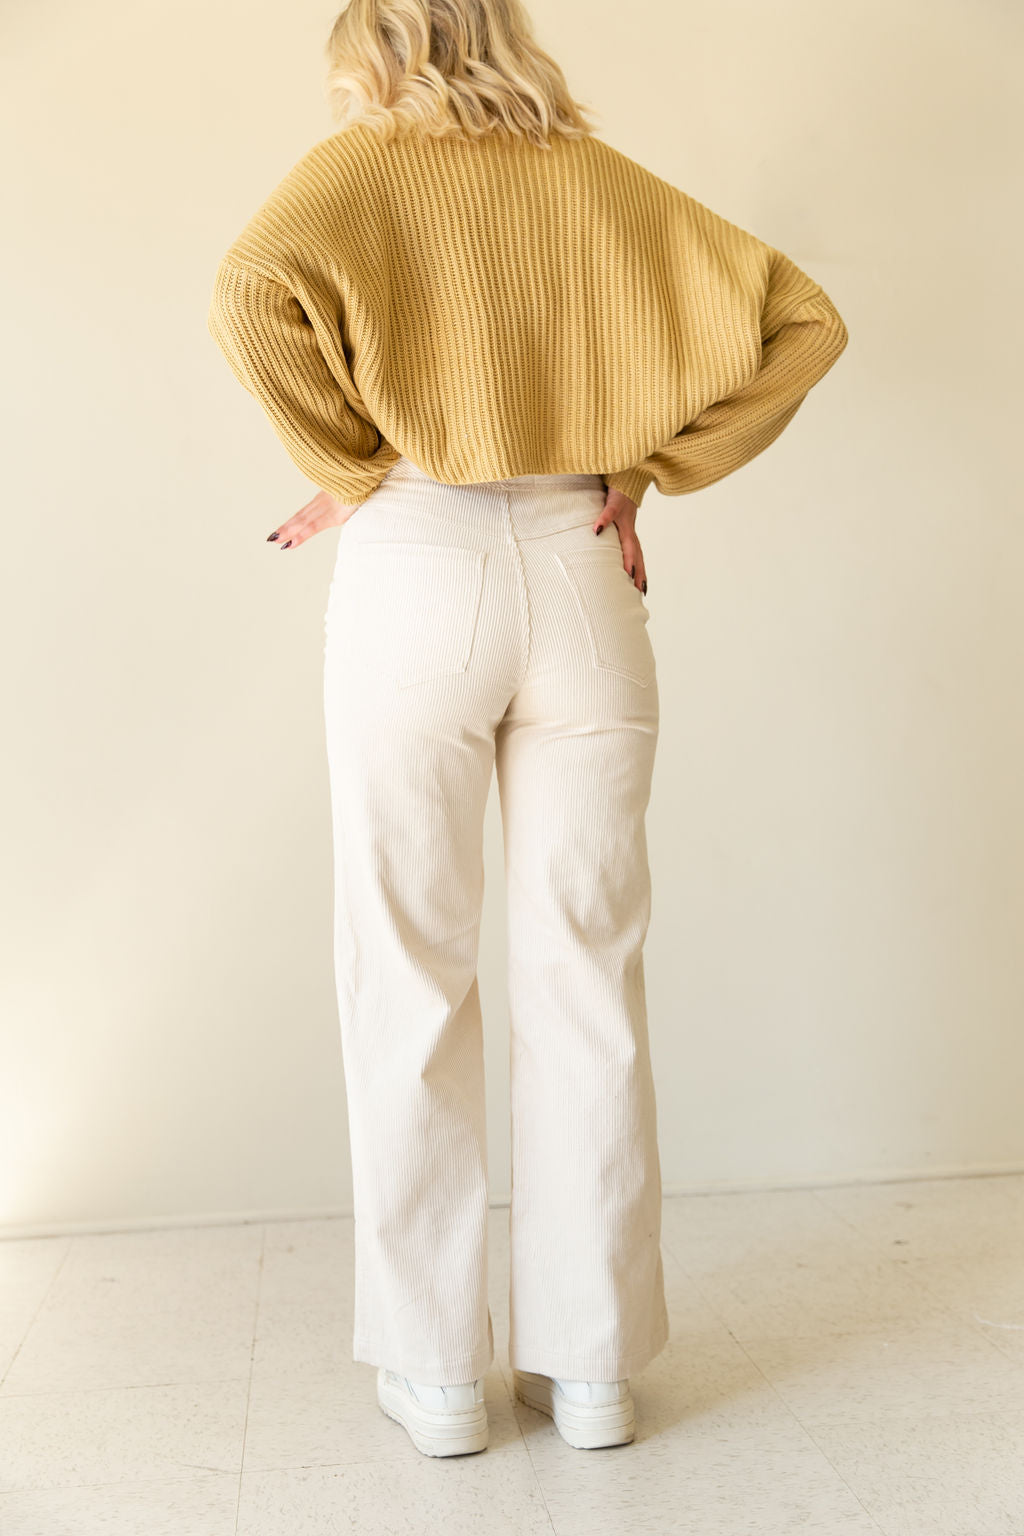 Find You Corduroy Pants by For Good